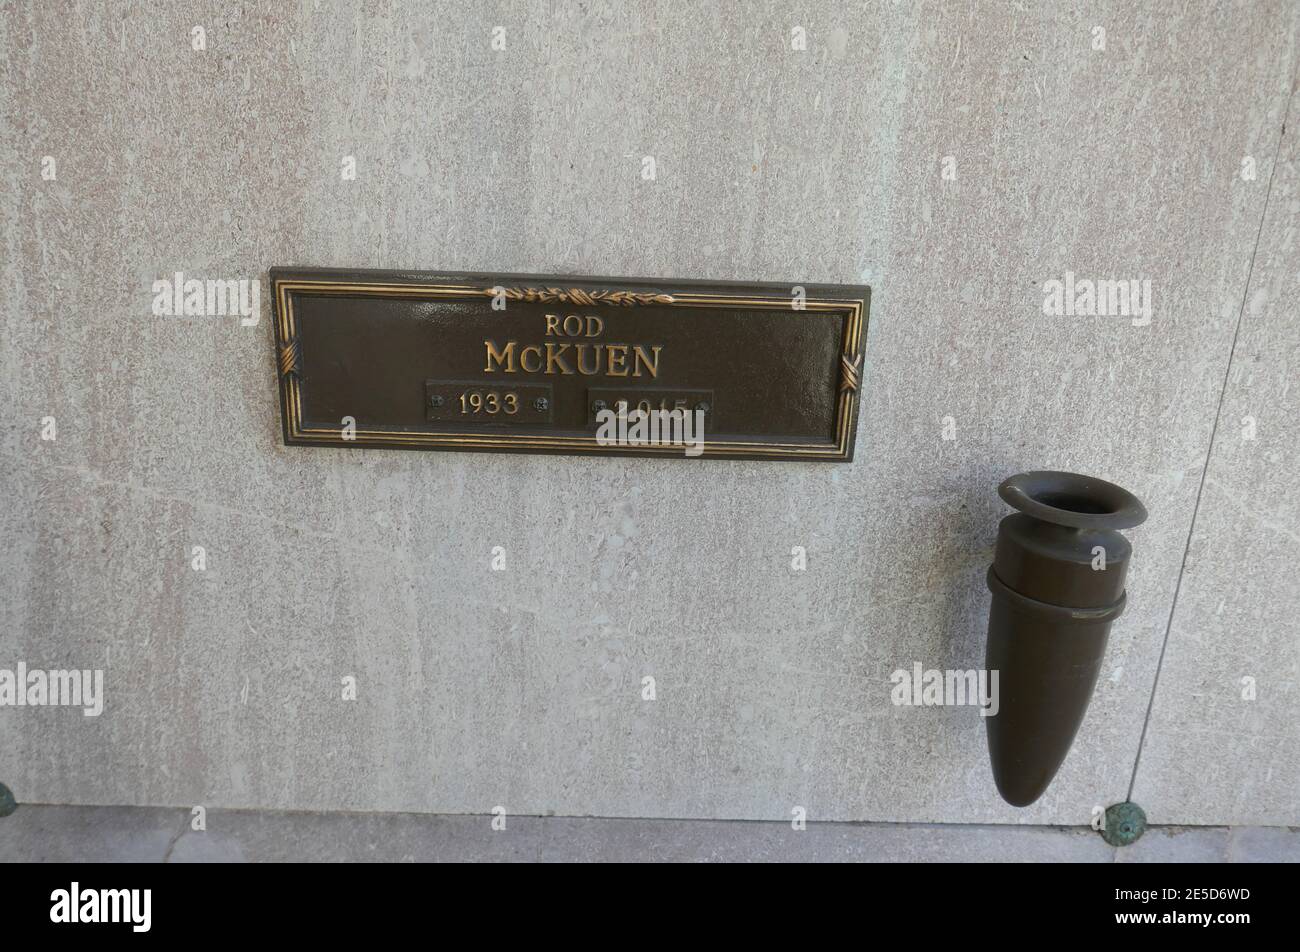 Los Angeles, California, USA 26th January 2021 A general view of atmosphere of poet/actor Rod McKuen's grave at Pierce Brothers Westwood Village Memorial Park on January 26, 2021 in Los Angeles, California, USA. Photo by Barry King/Alamy Stock Photo Stock Photo